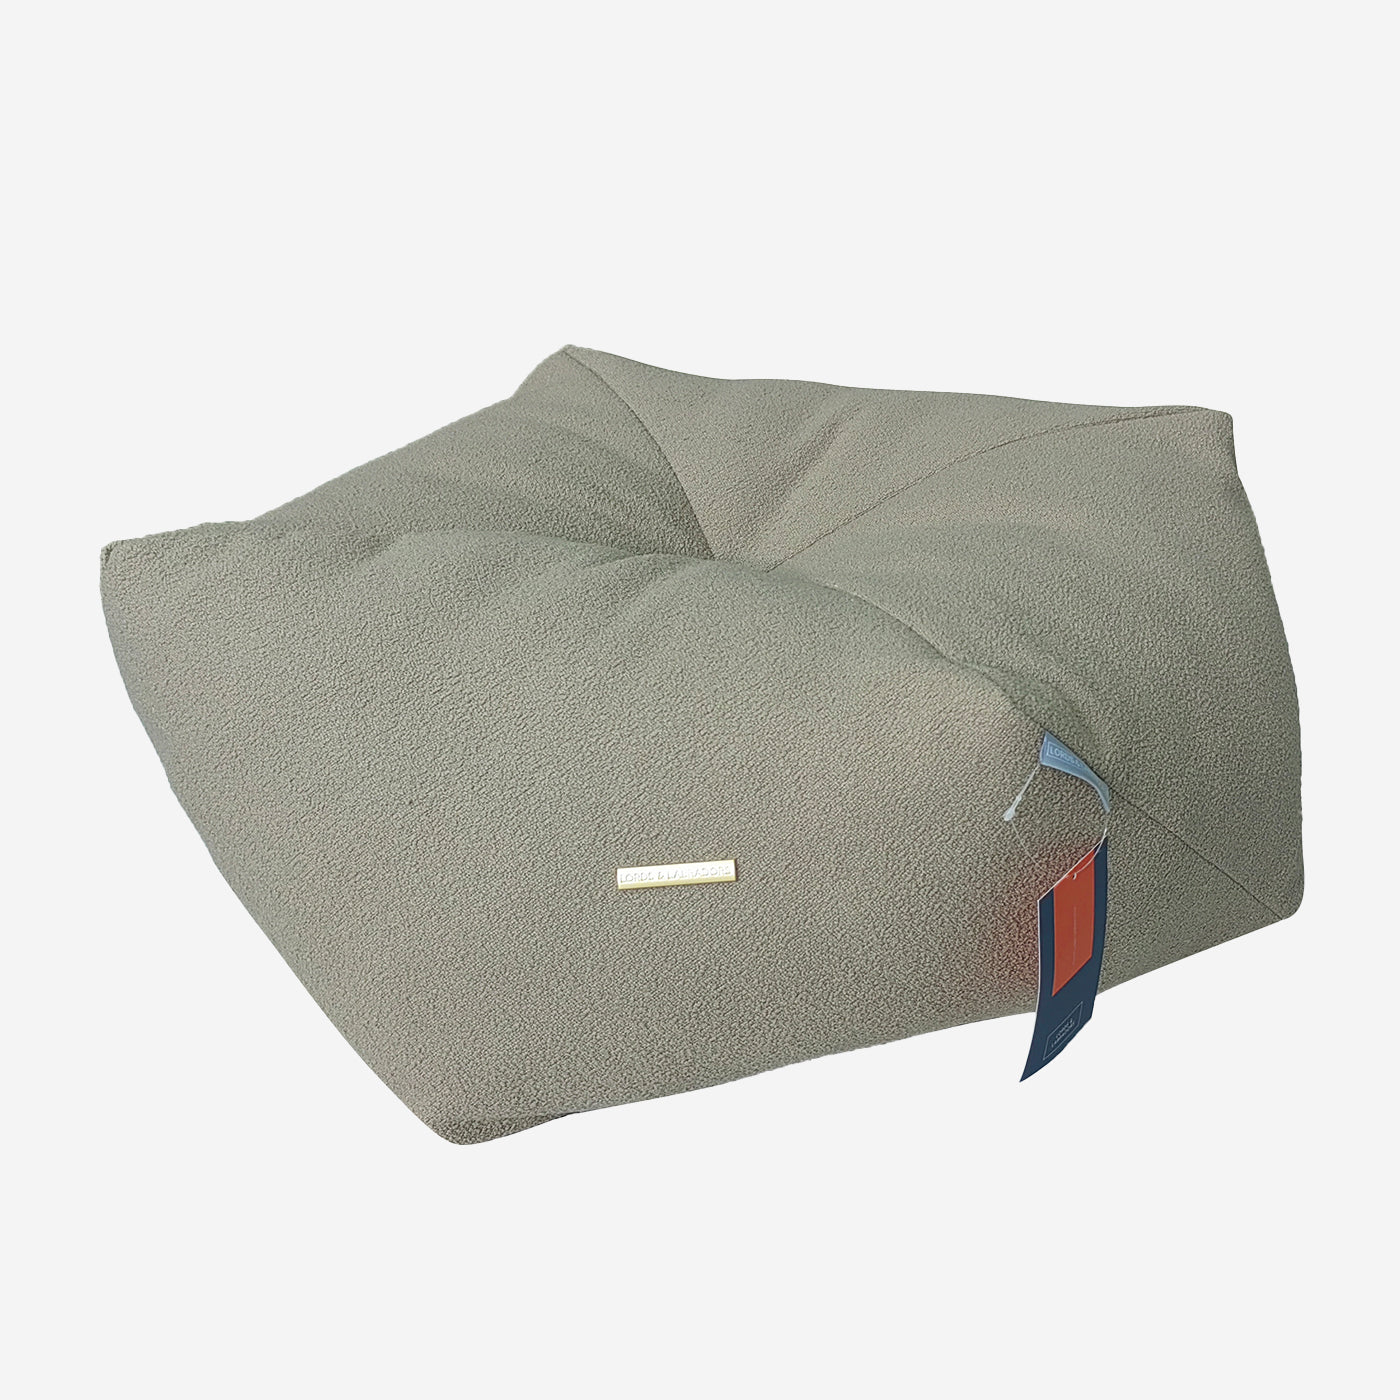 Lords & Labradors Snooze Pouff Puffy Pet Bed, Luxury Beds For Dogs, Available Now at Lords & Labradors US